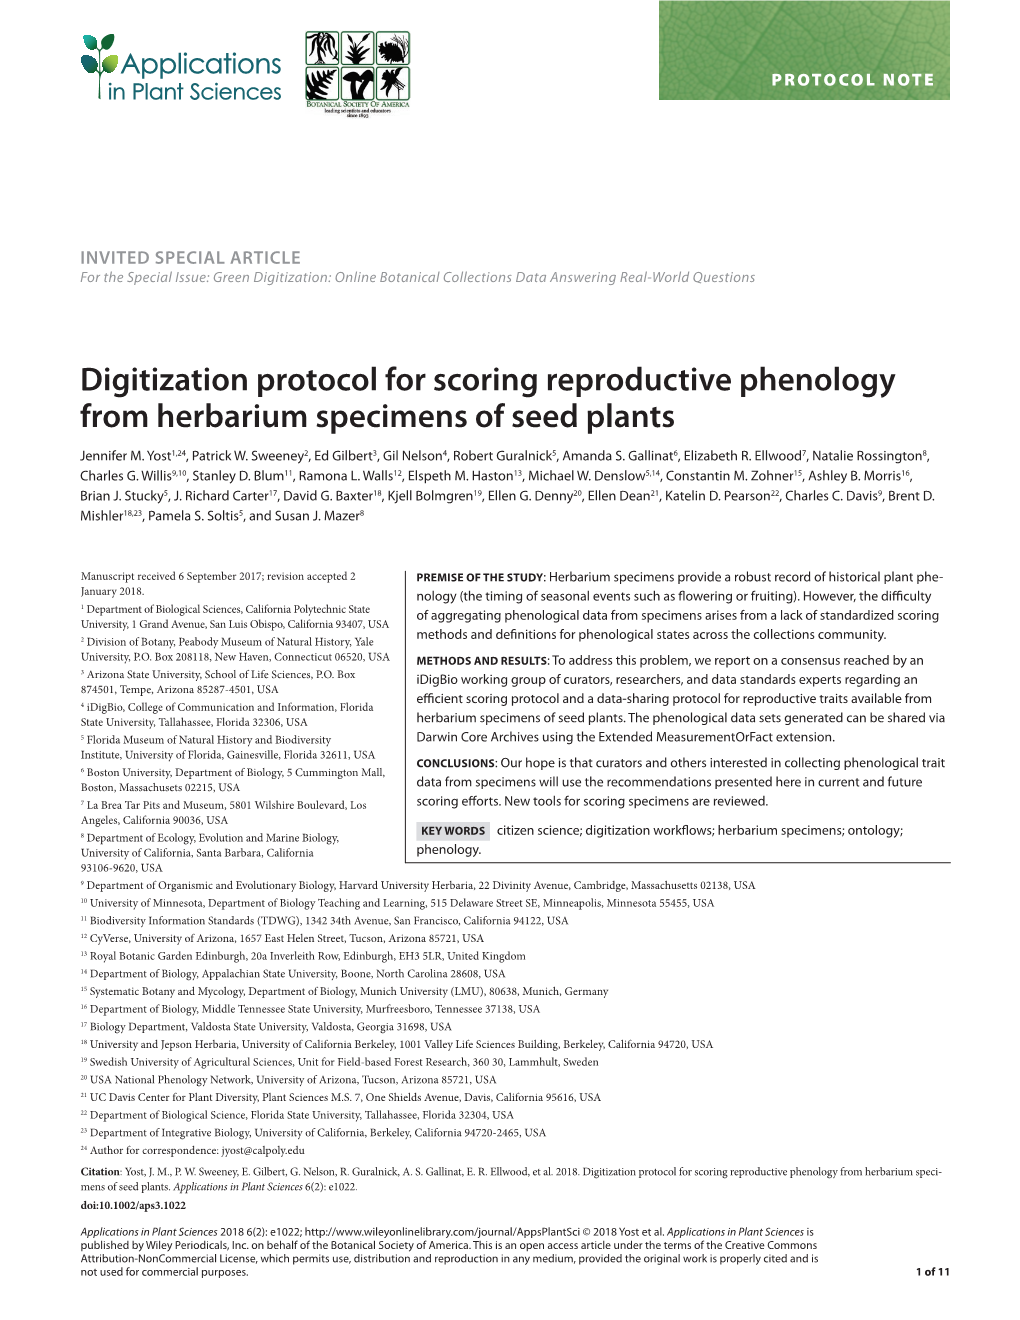 Digitization Protocol for Scoring Reproductive Phenology from Herbarium Specimens of Seed Plants